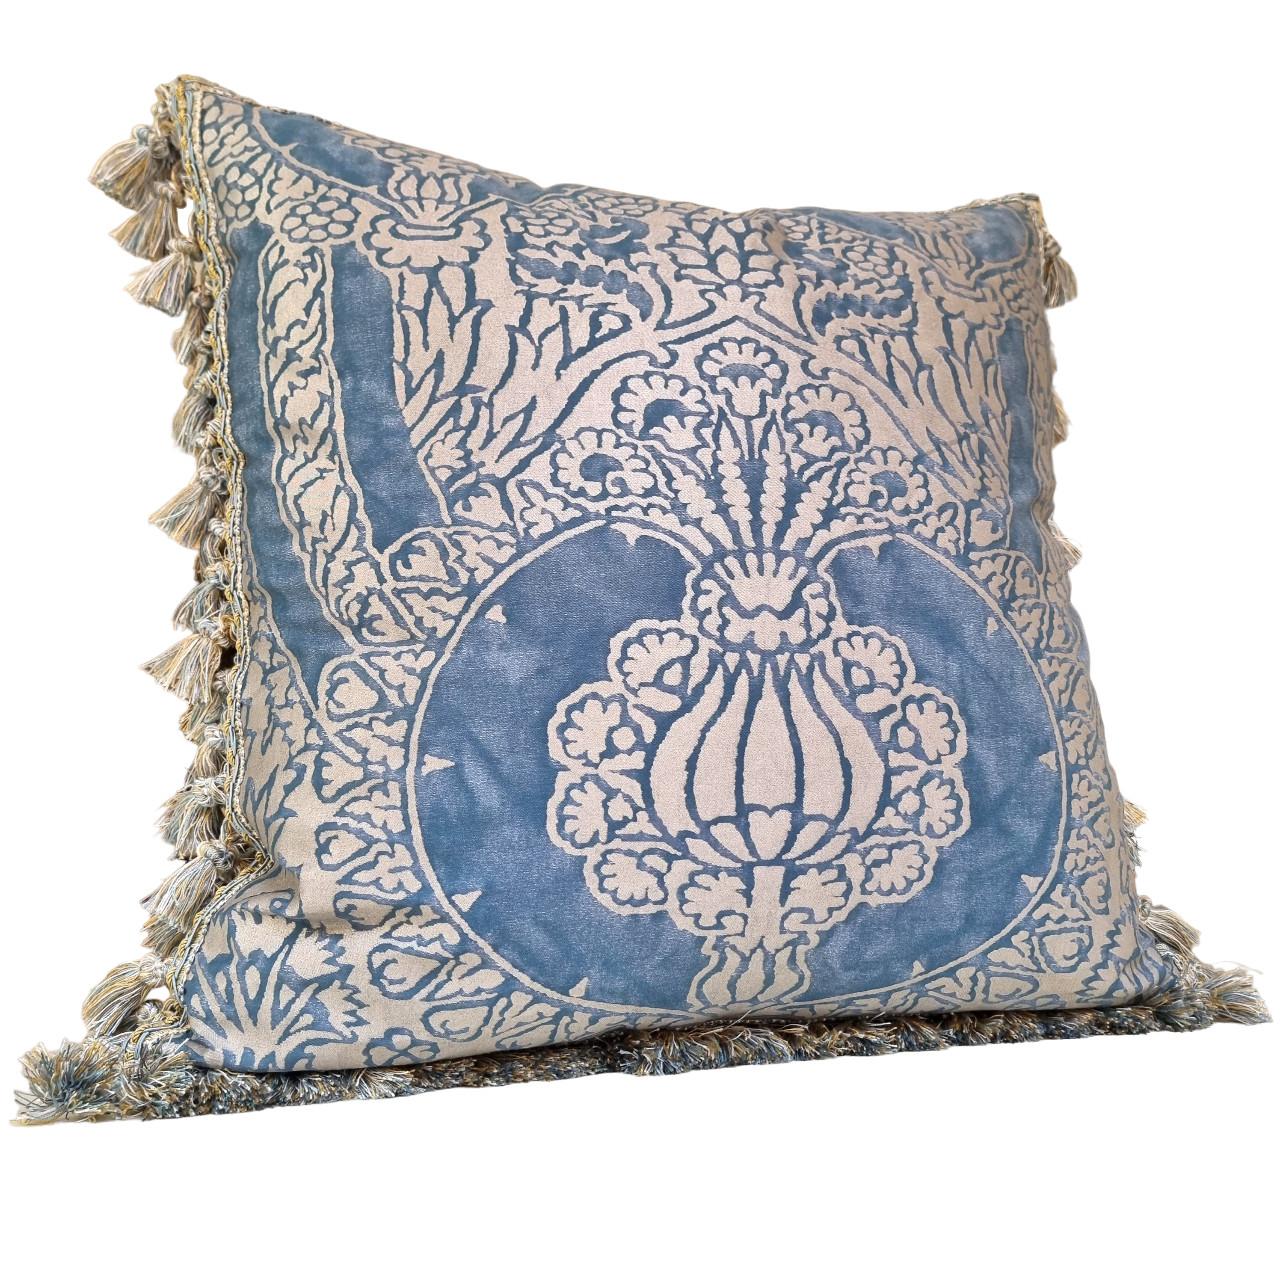 This amazing double-sided pillow is handmade using Fortuny fabric Nicolo pattern in blue and silvery gold color.
The pillow is embellished all along the four edges with multicolored luxurious tassel trim in blue and gold color.
The pillow cover is